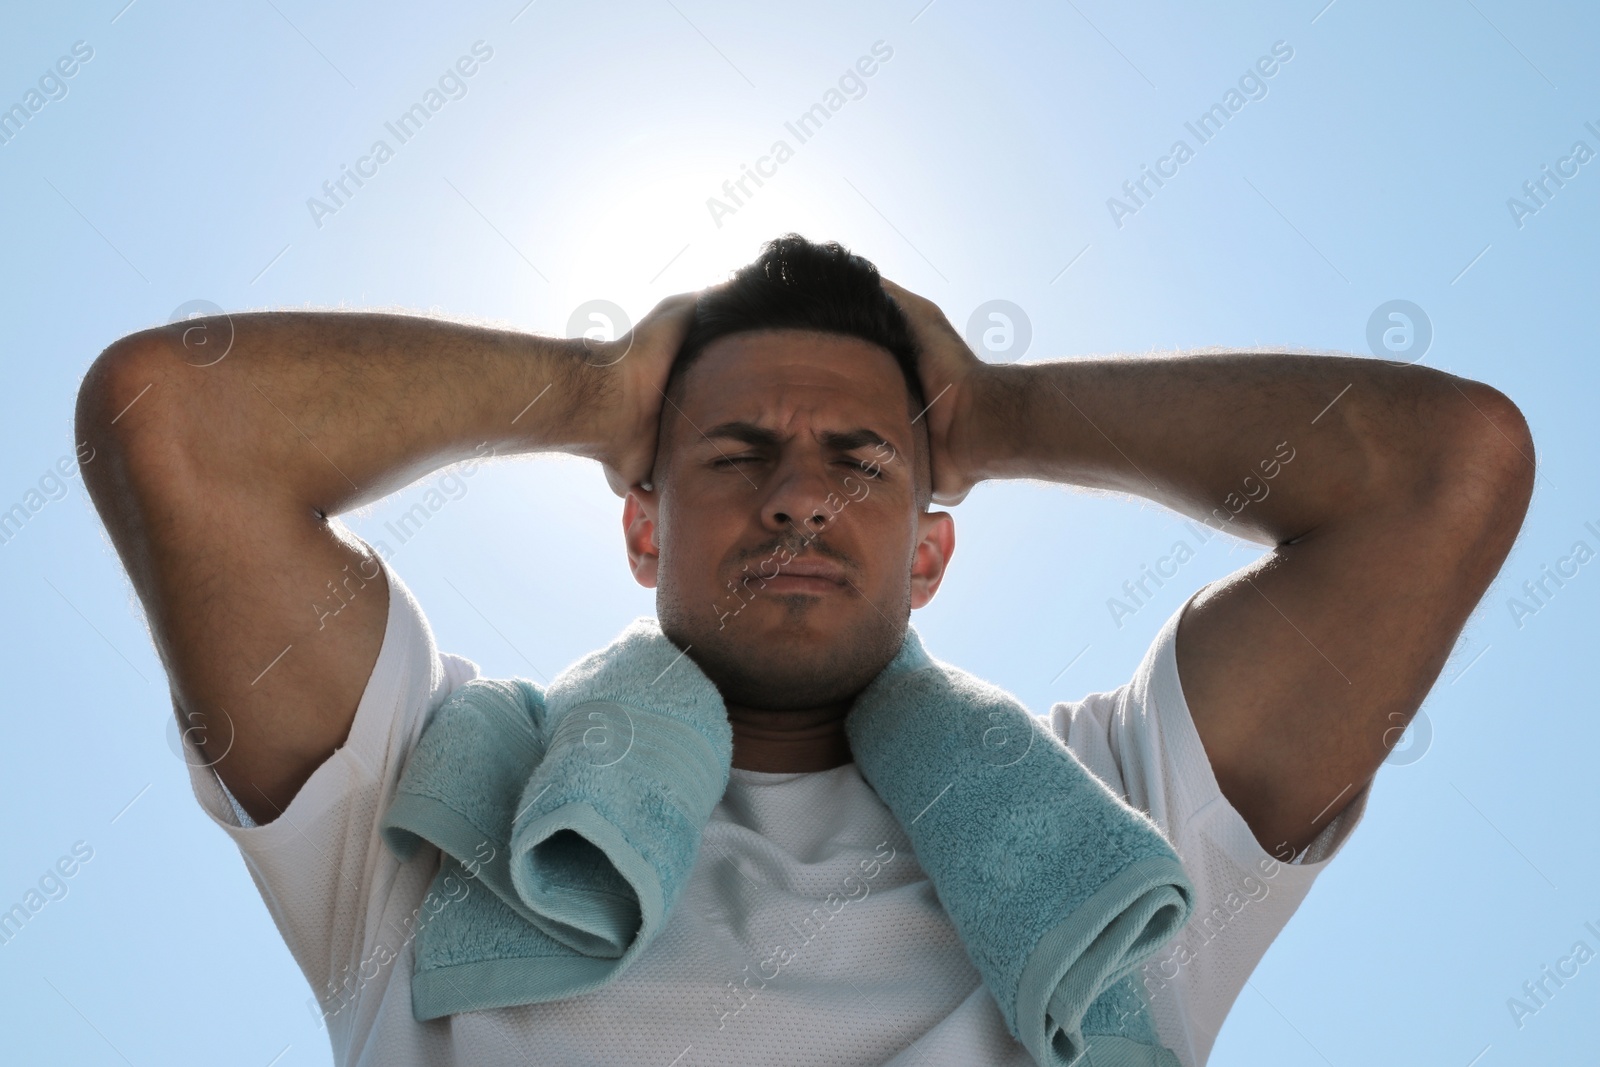 Photo of Man with towel suffering from heat stroke outdoors, low angle view